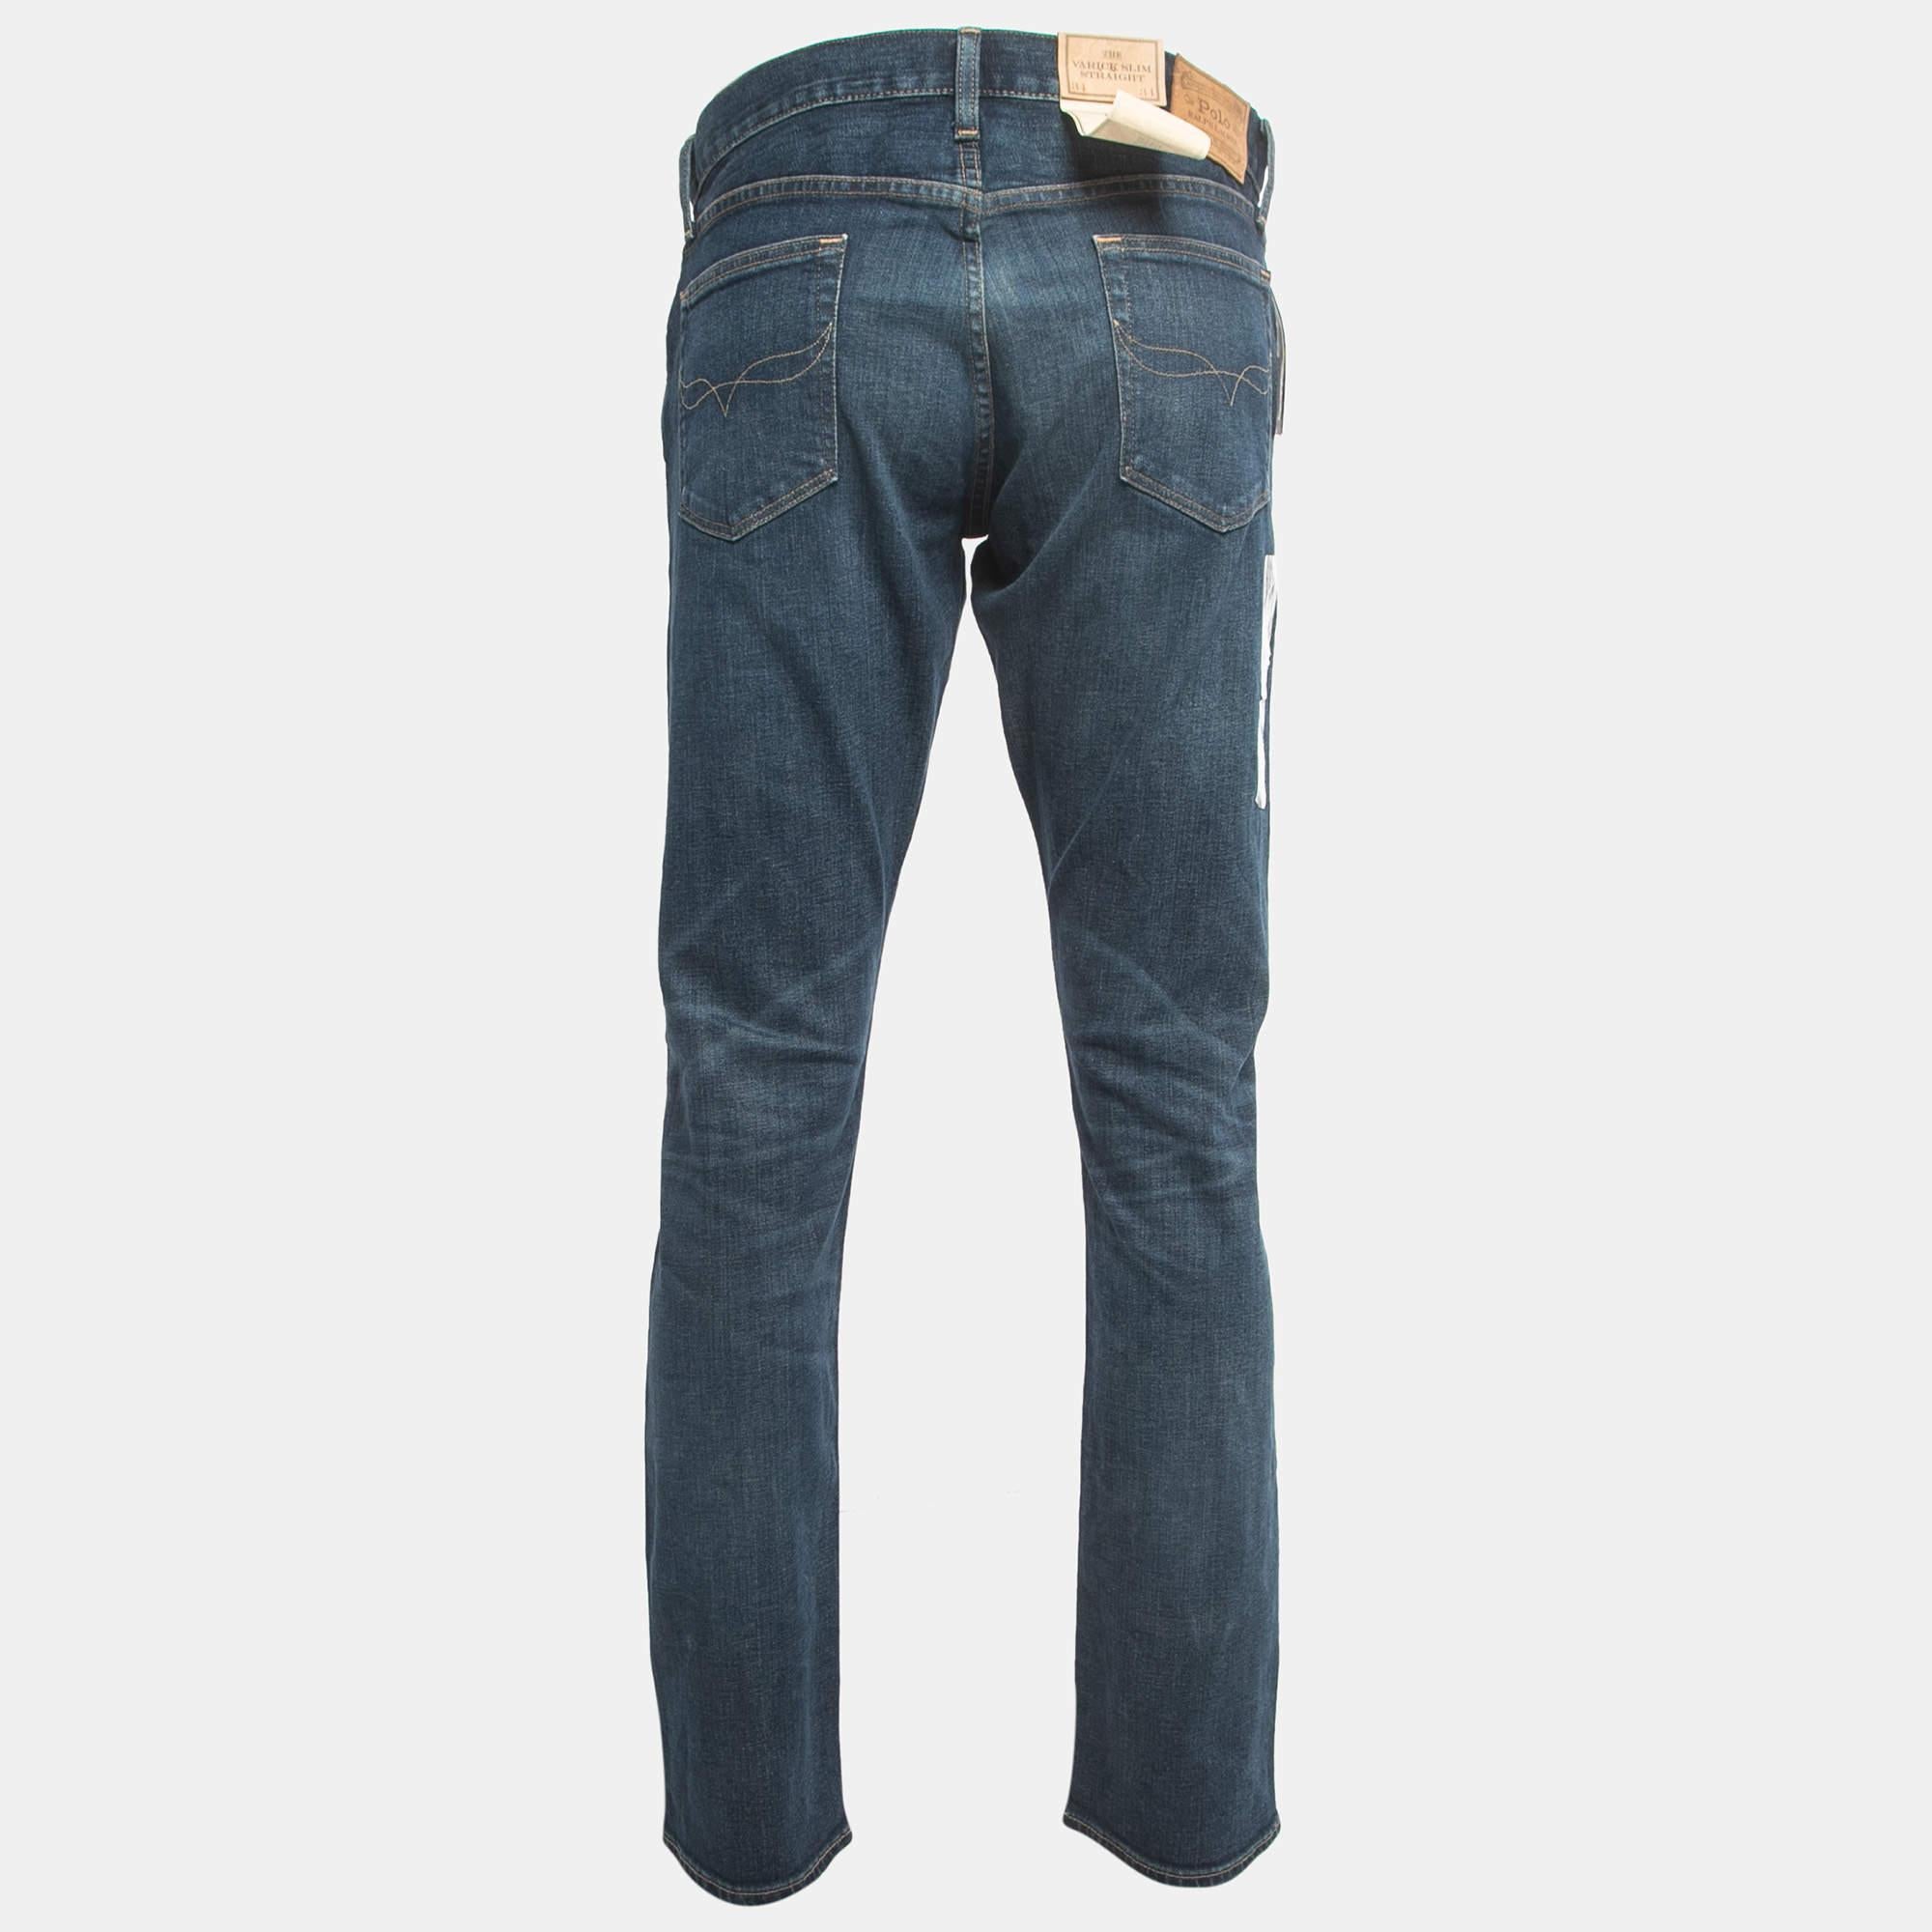 A good pair of jeans always make the closet complete. This pair of jeans is tailored with such skill and style that it will be your favorite in no time. It will give you a comfortable, stylish fit.

Includes: Brand Tag